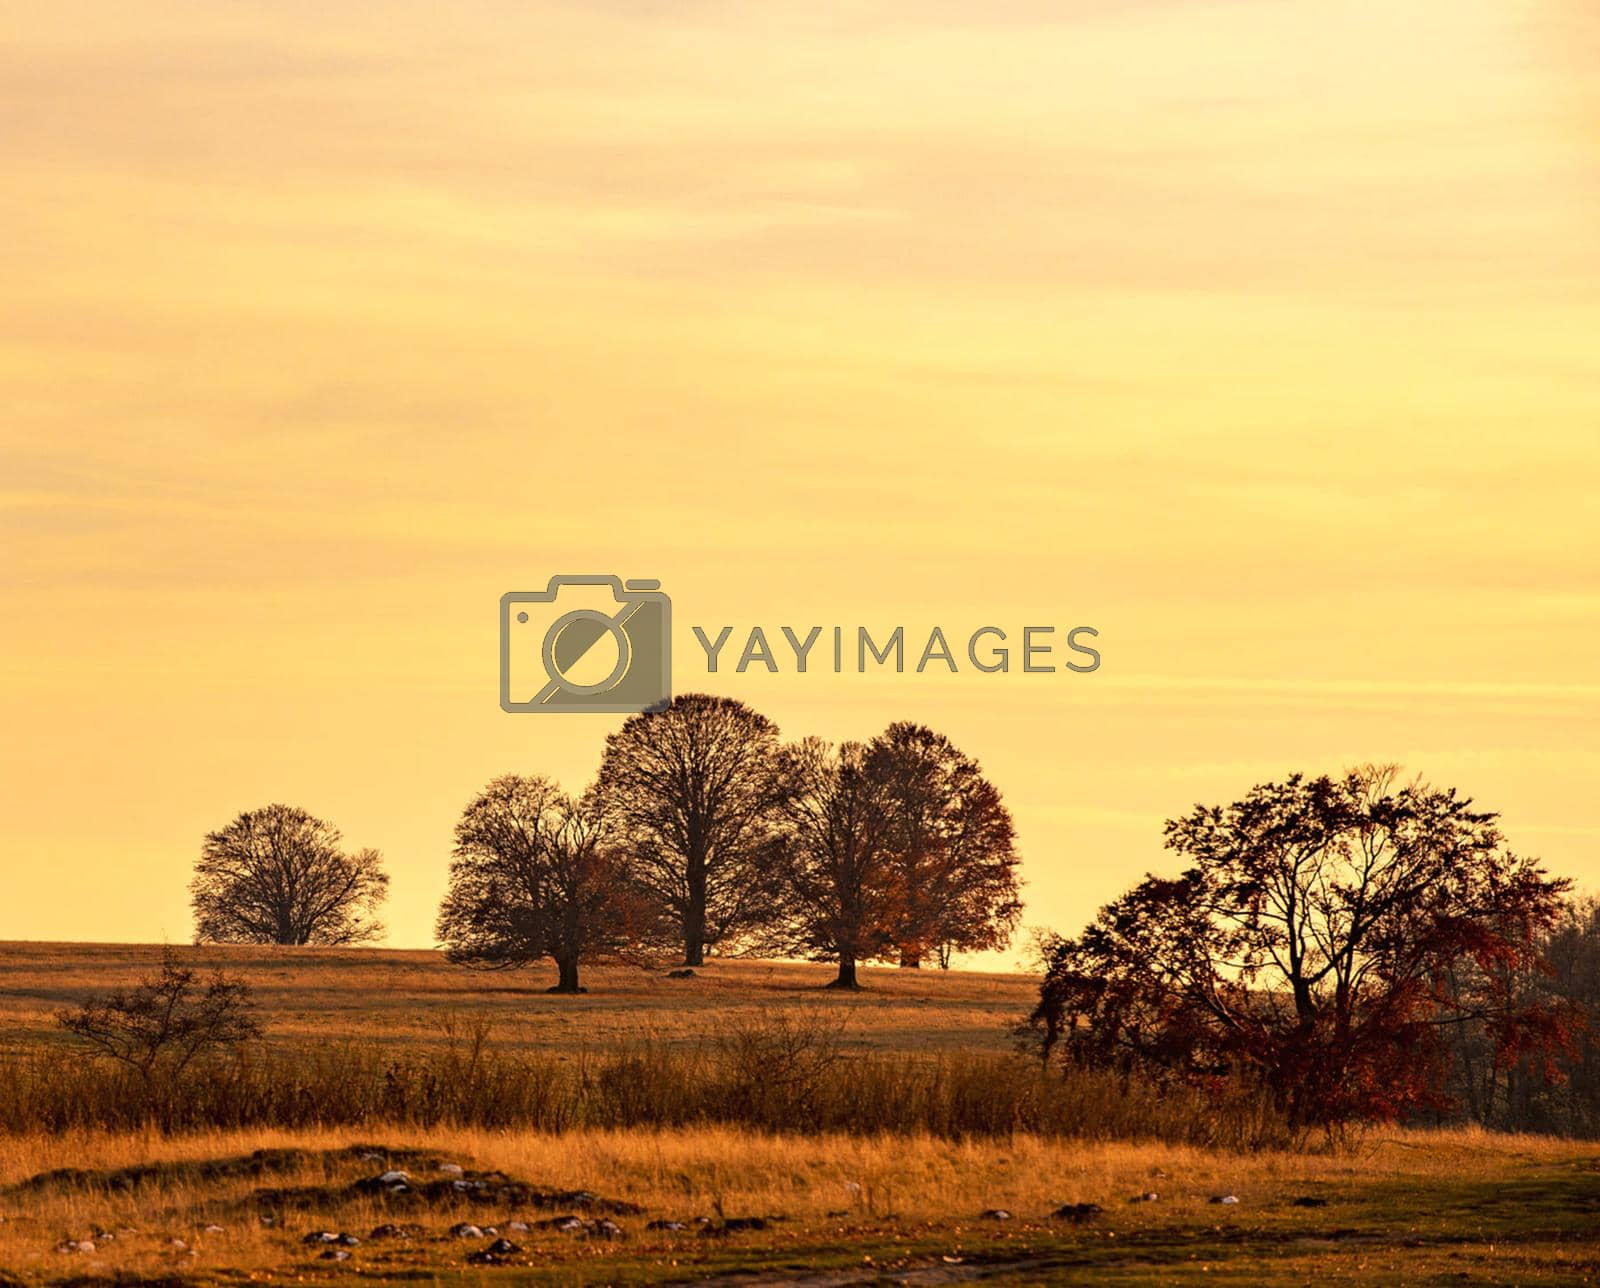 Royalty free image of Transylvania autumn pictures by TravelSync27